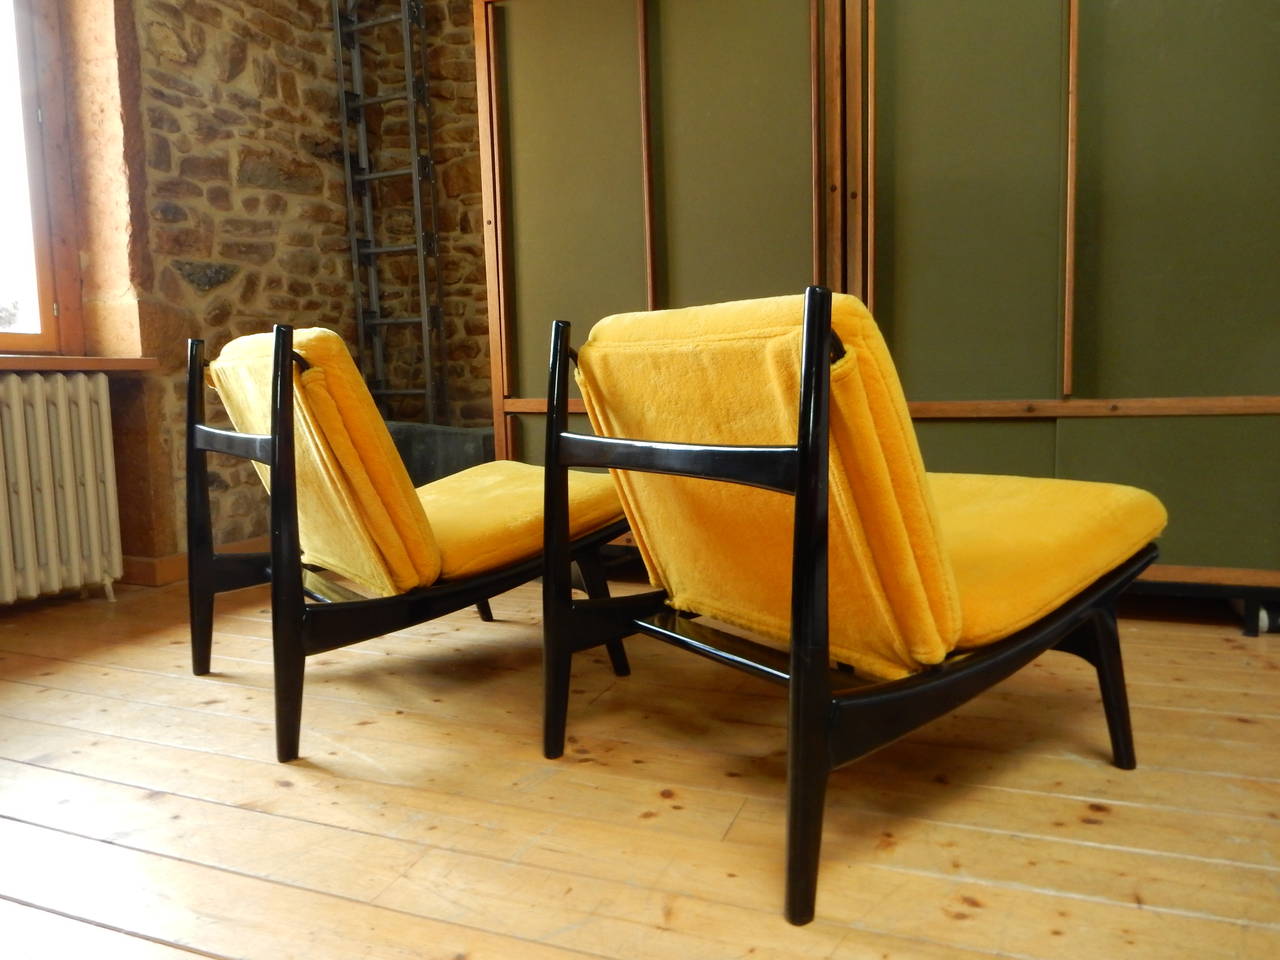 A beautiful pair of Joseph Andre Motte edited by Steiner in 1960-1965 with a new yellow upholstery, structure made of black lacquered wood in perfect condition.